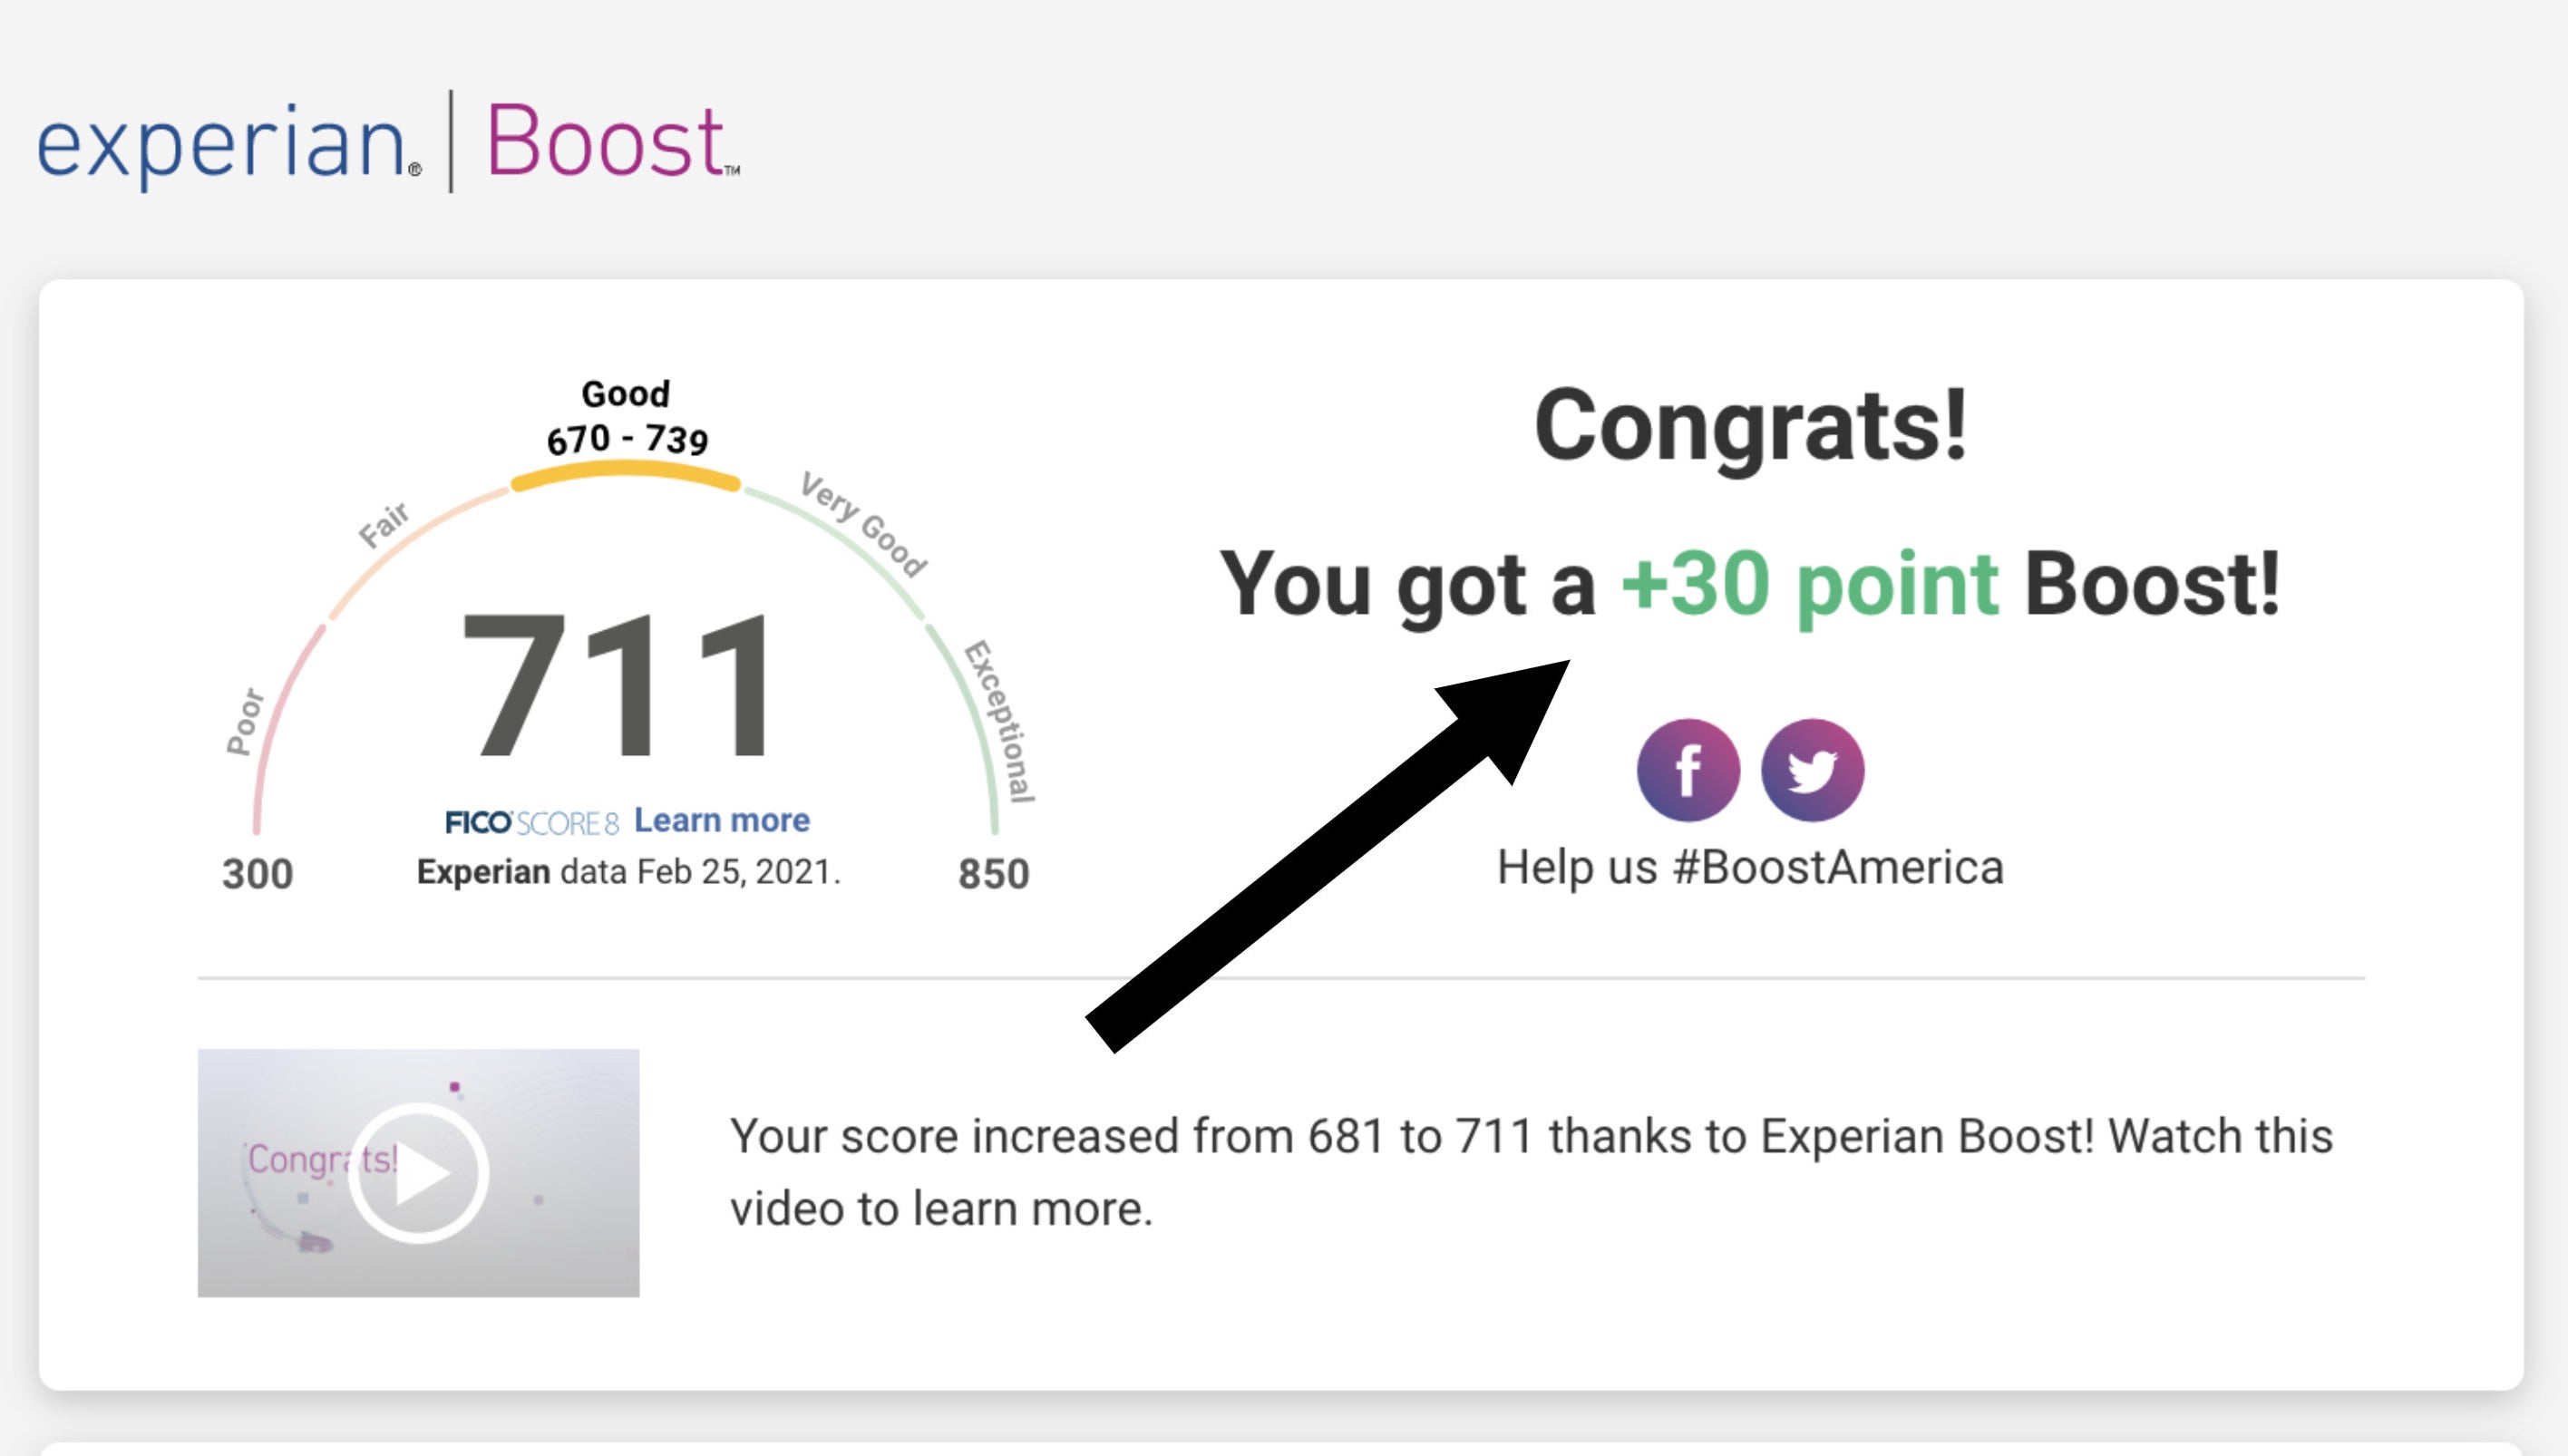 Screenshot showing a credit score increase of 30 points, bringing my score to 711